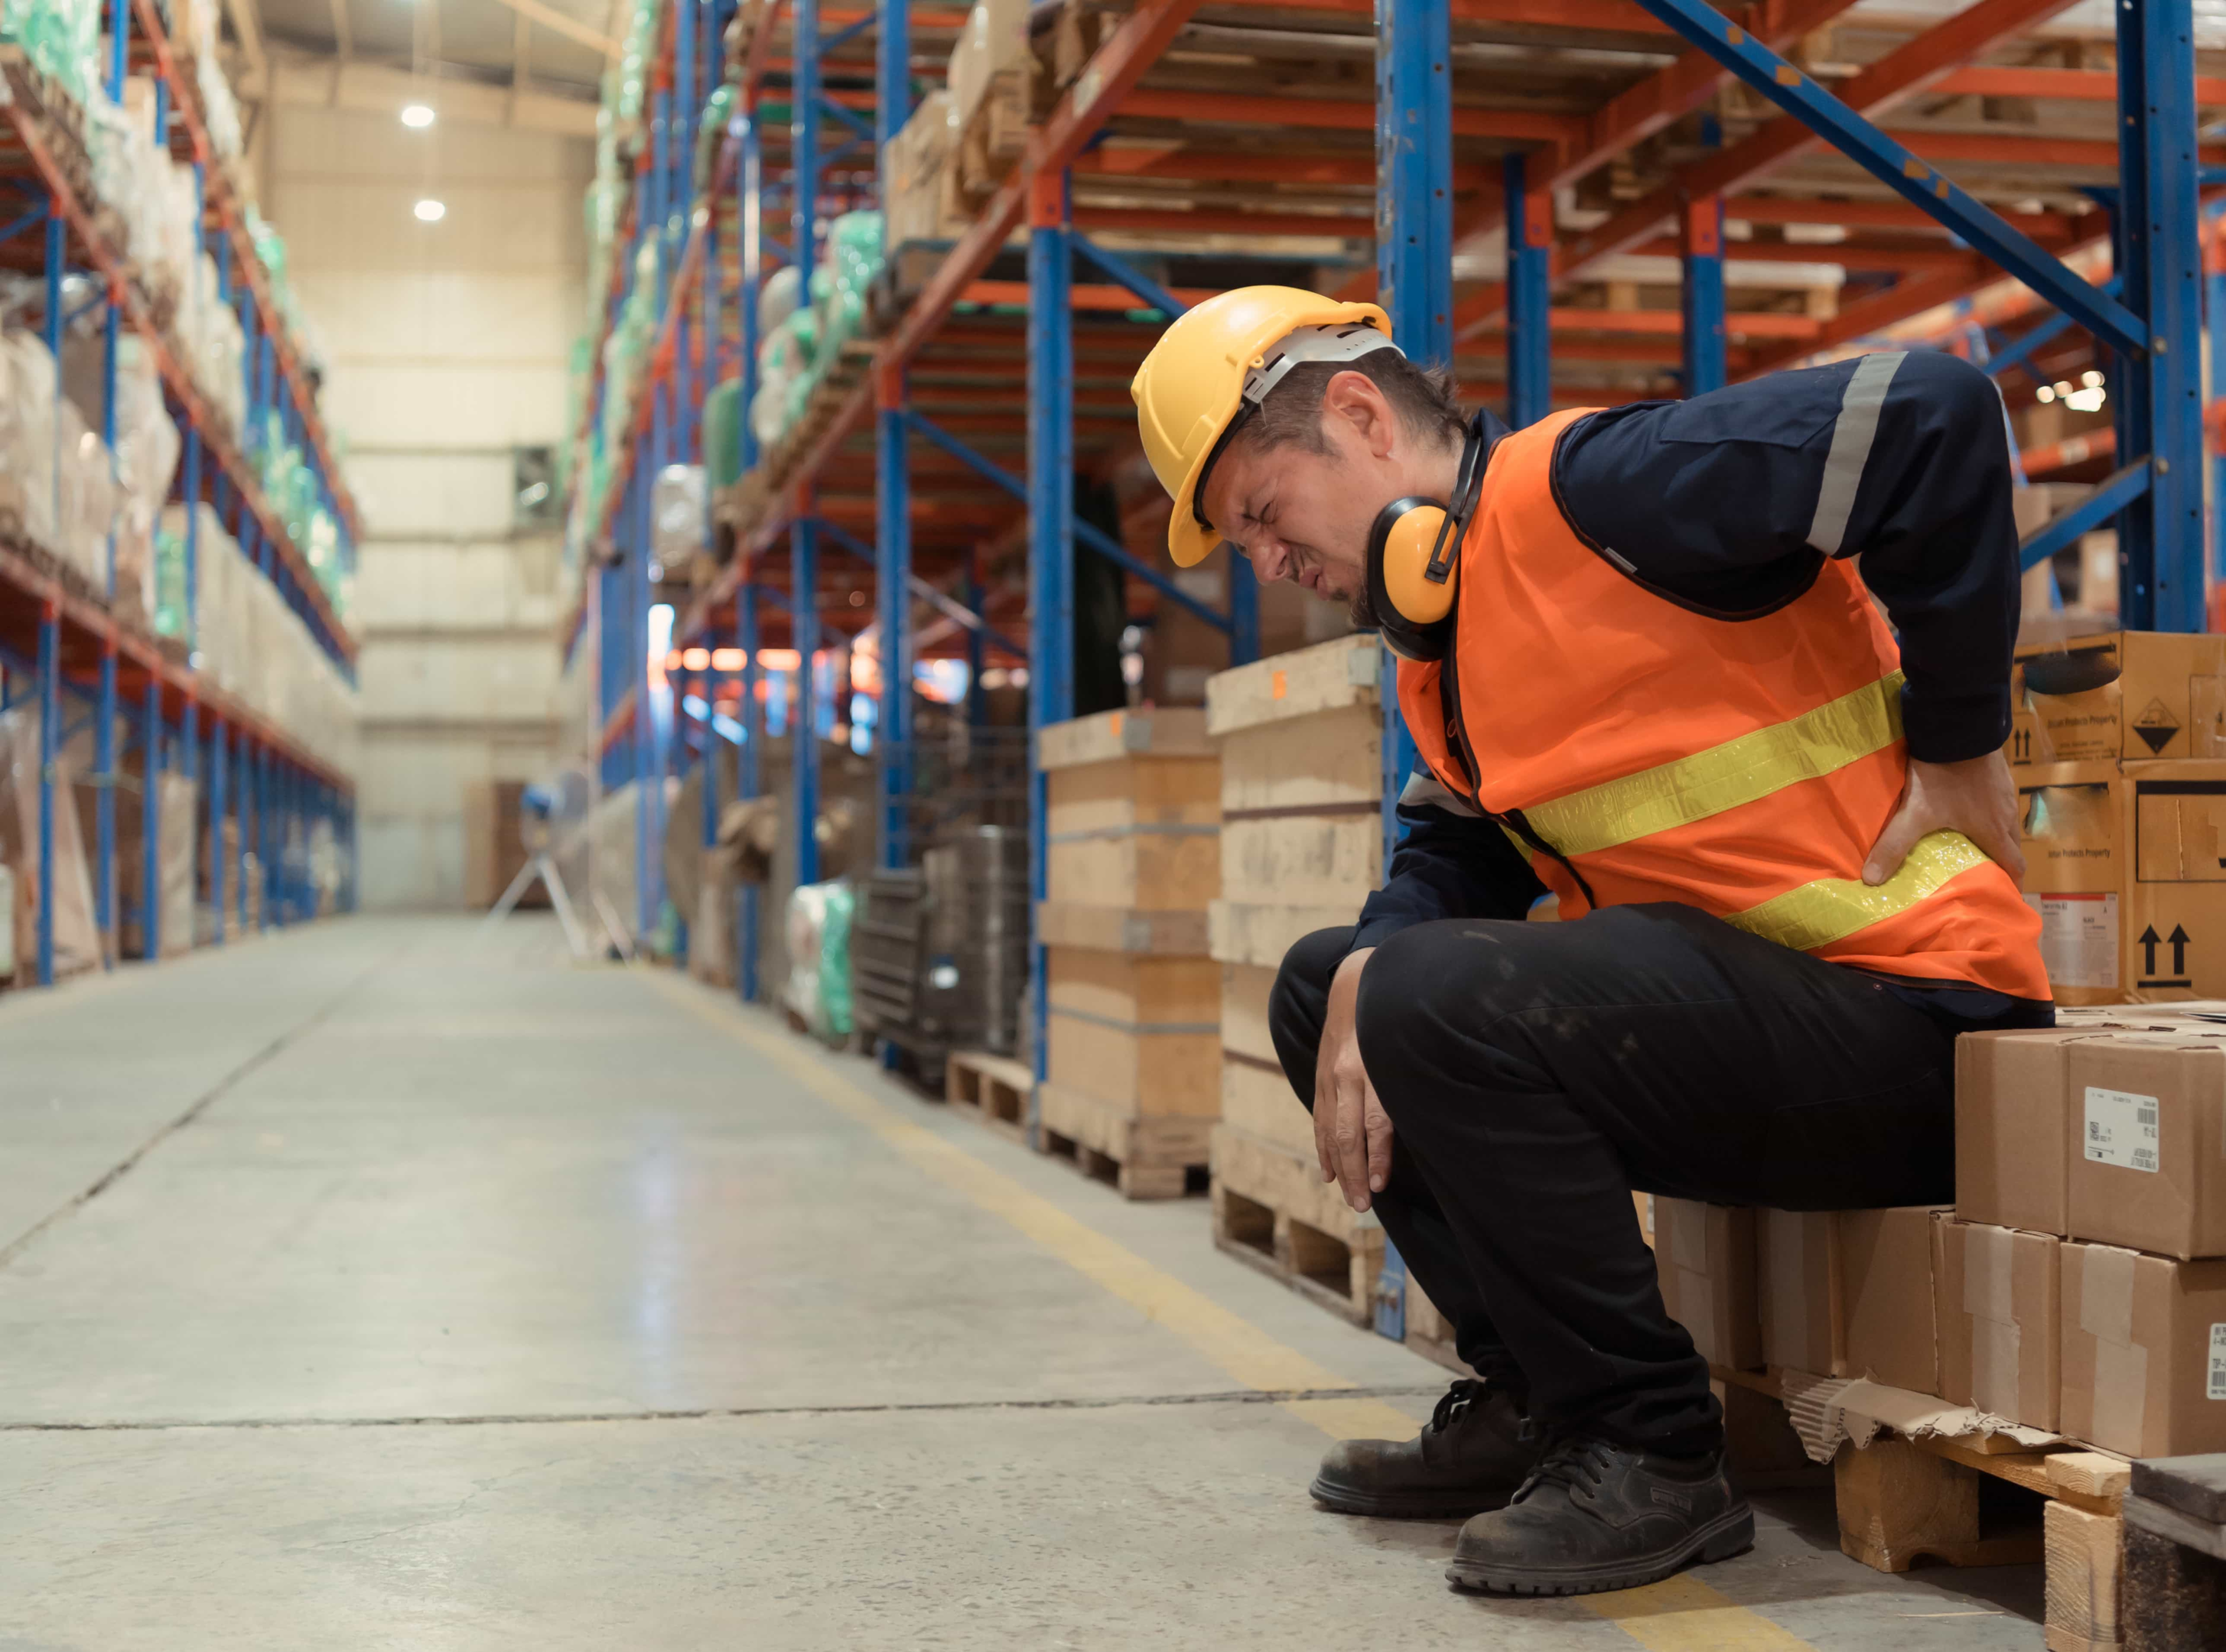 Man experiencing back pain due to repetitive strain and heavy lifting at work. He is in a warehouse.